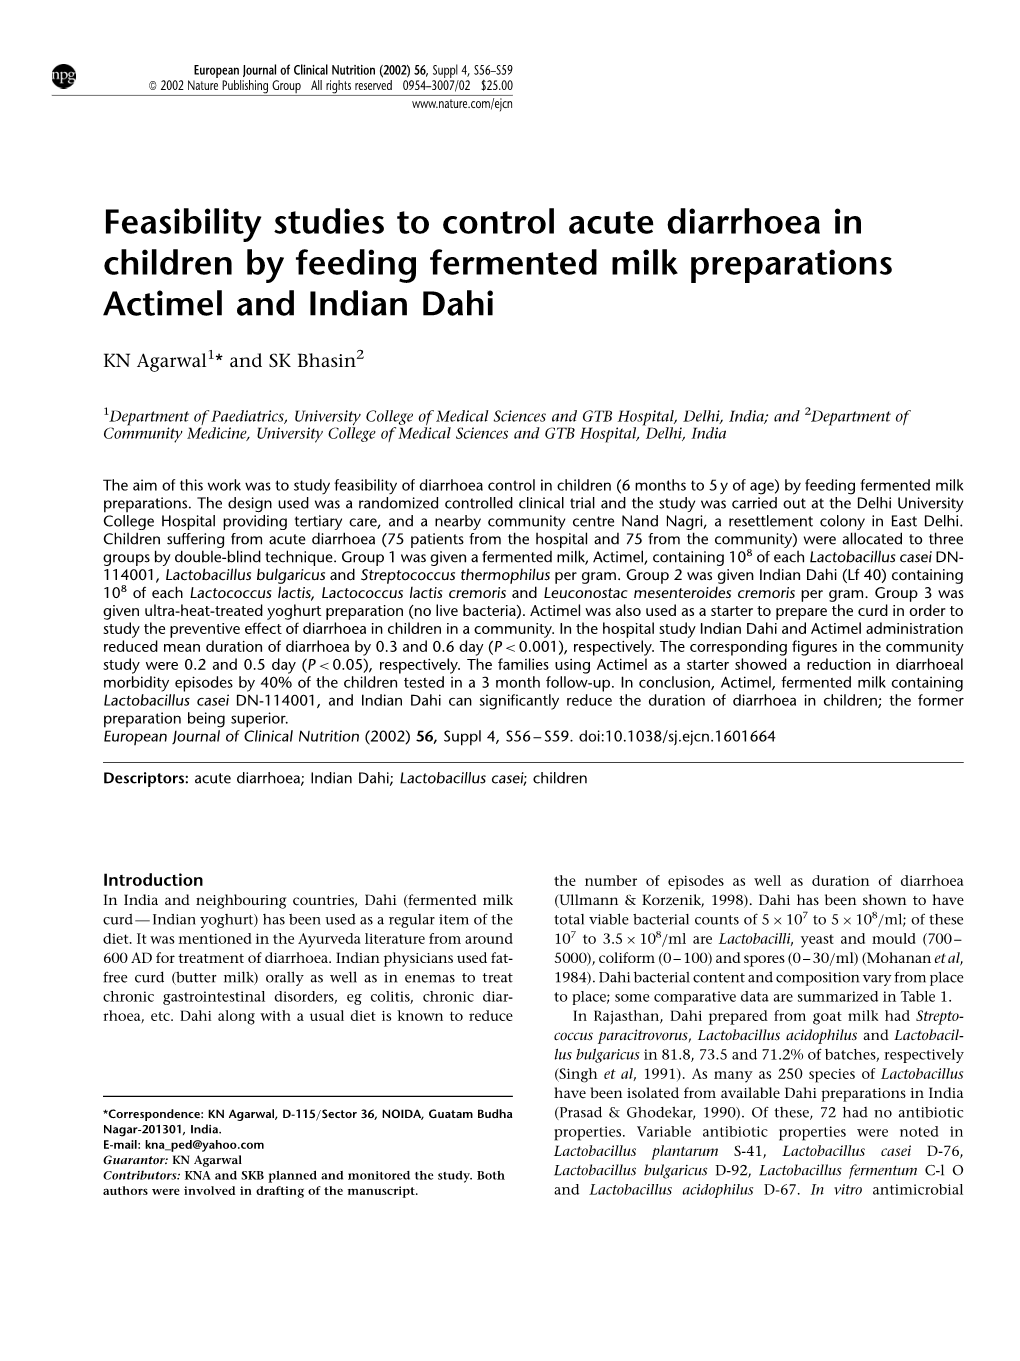 Feasibility Studies to Control Acute Diarrhoea in Children by Feeding Fermented Milk Preparations Actimel and Indian Dahi